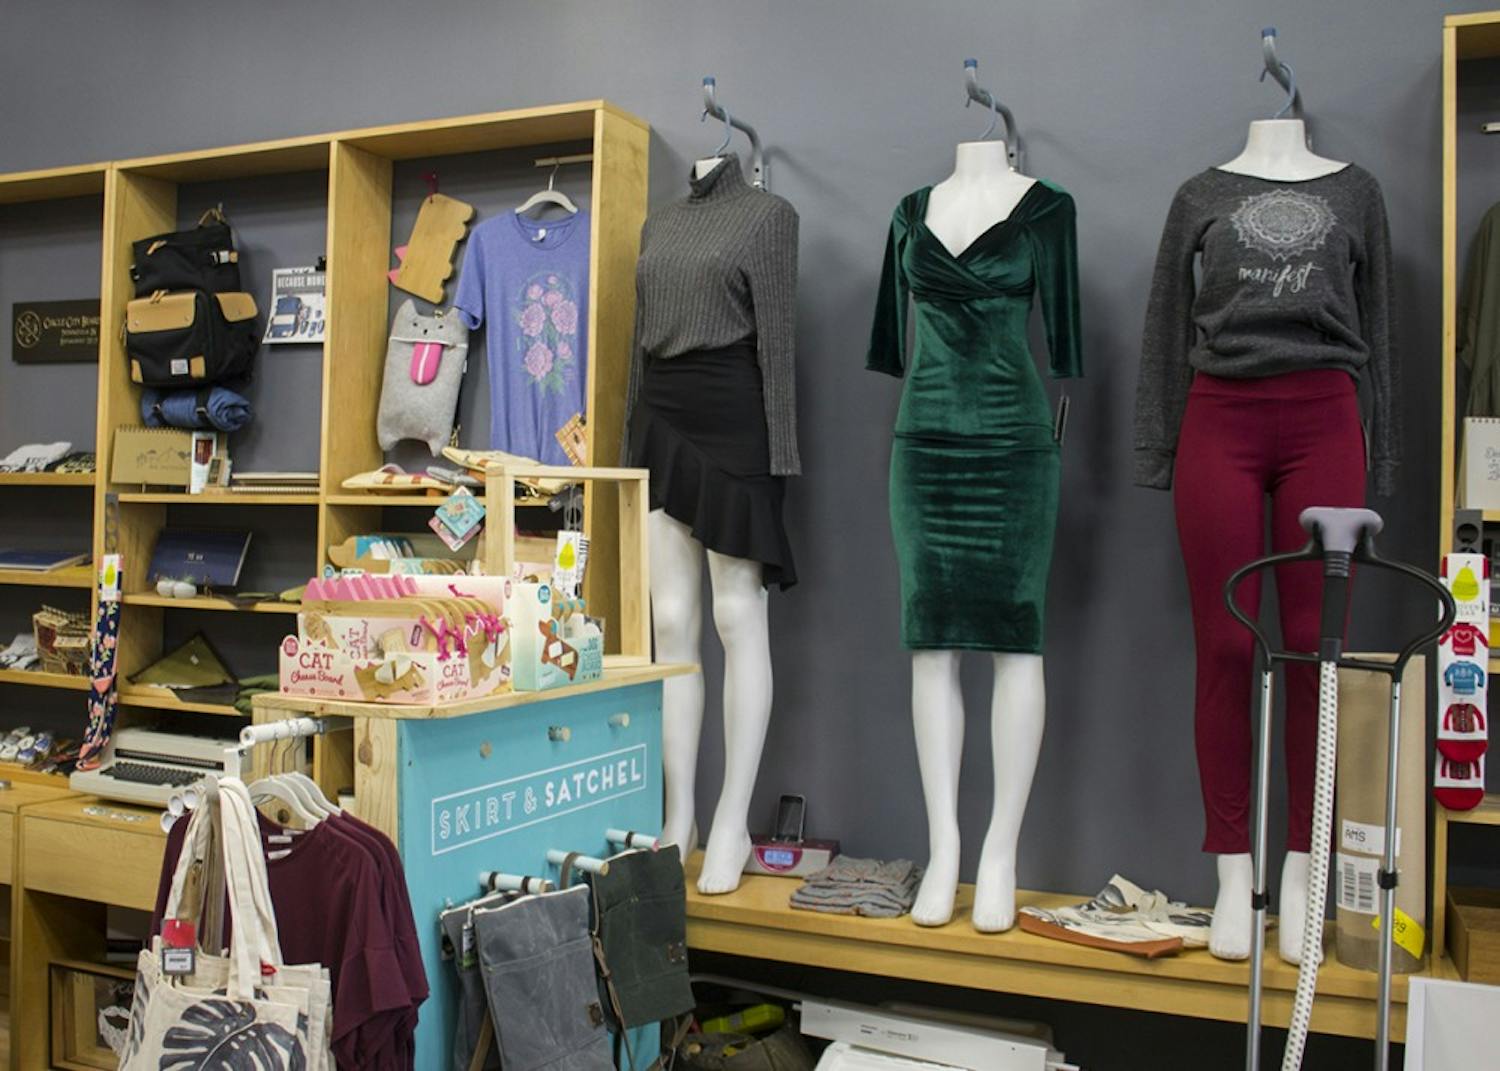 Skirt and Satchel opened Friday in Bloomington's Fountain Square Mall. The boutique is owned by Andy McManis.